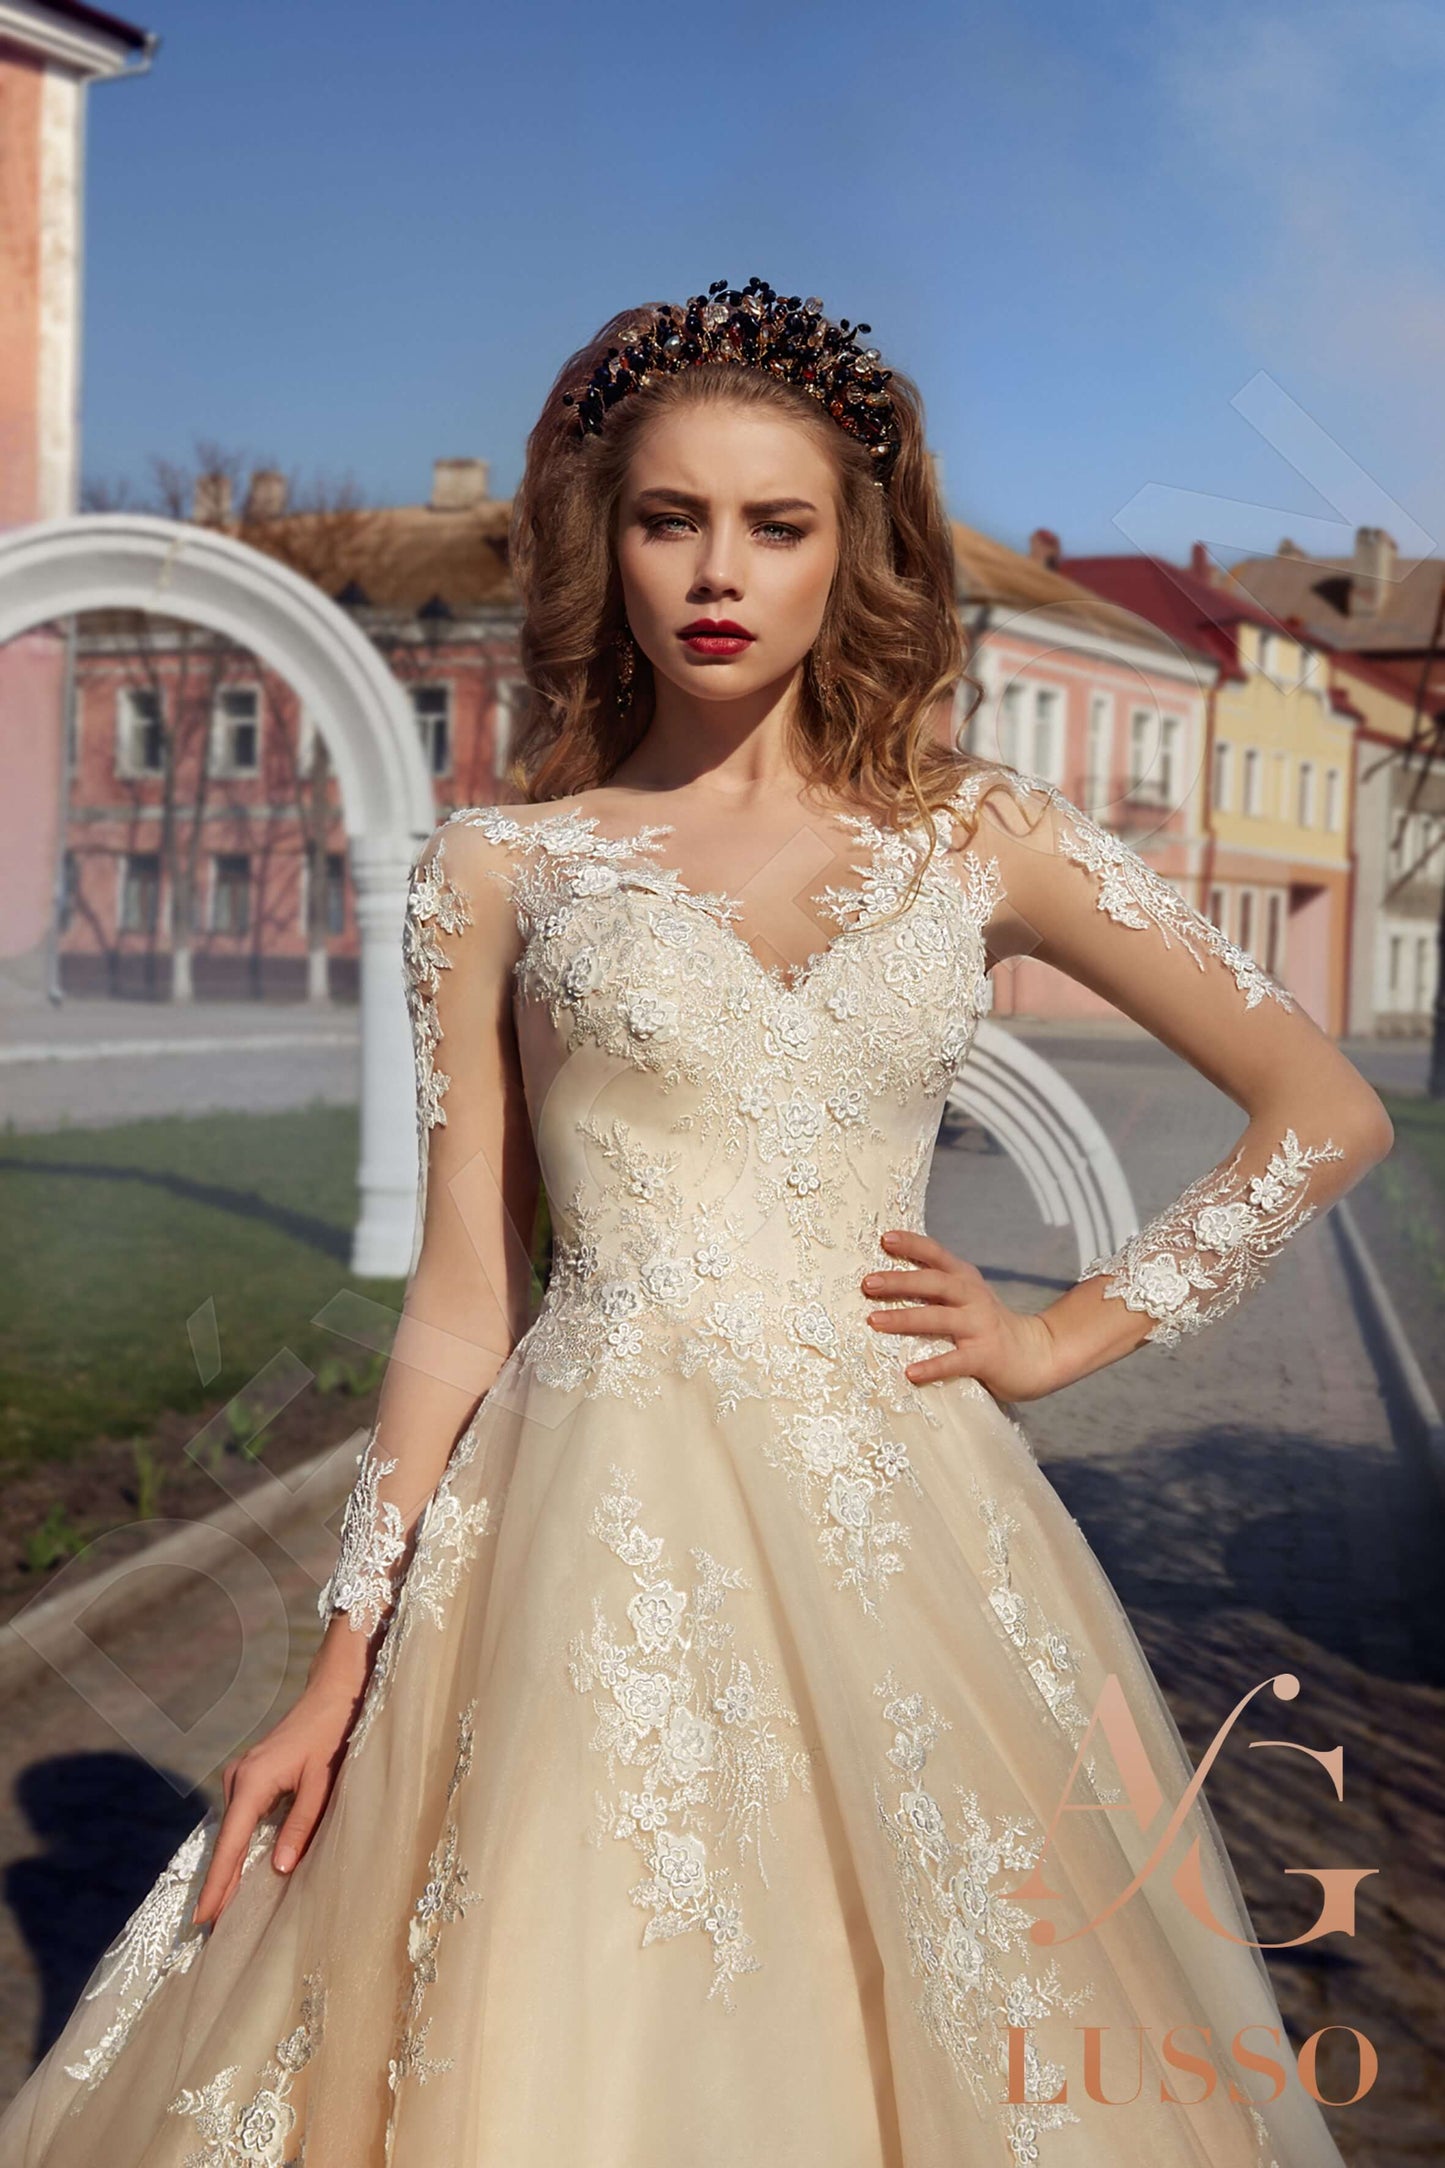 Imelly Illusion back Princess/Ball Gown Long sleeve Wedding Dress 2